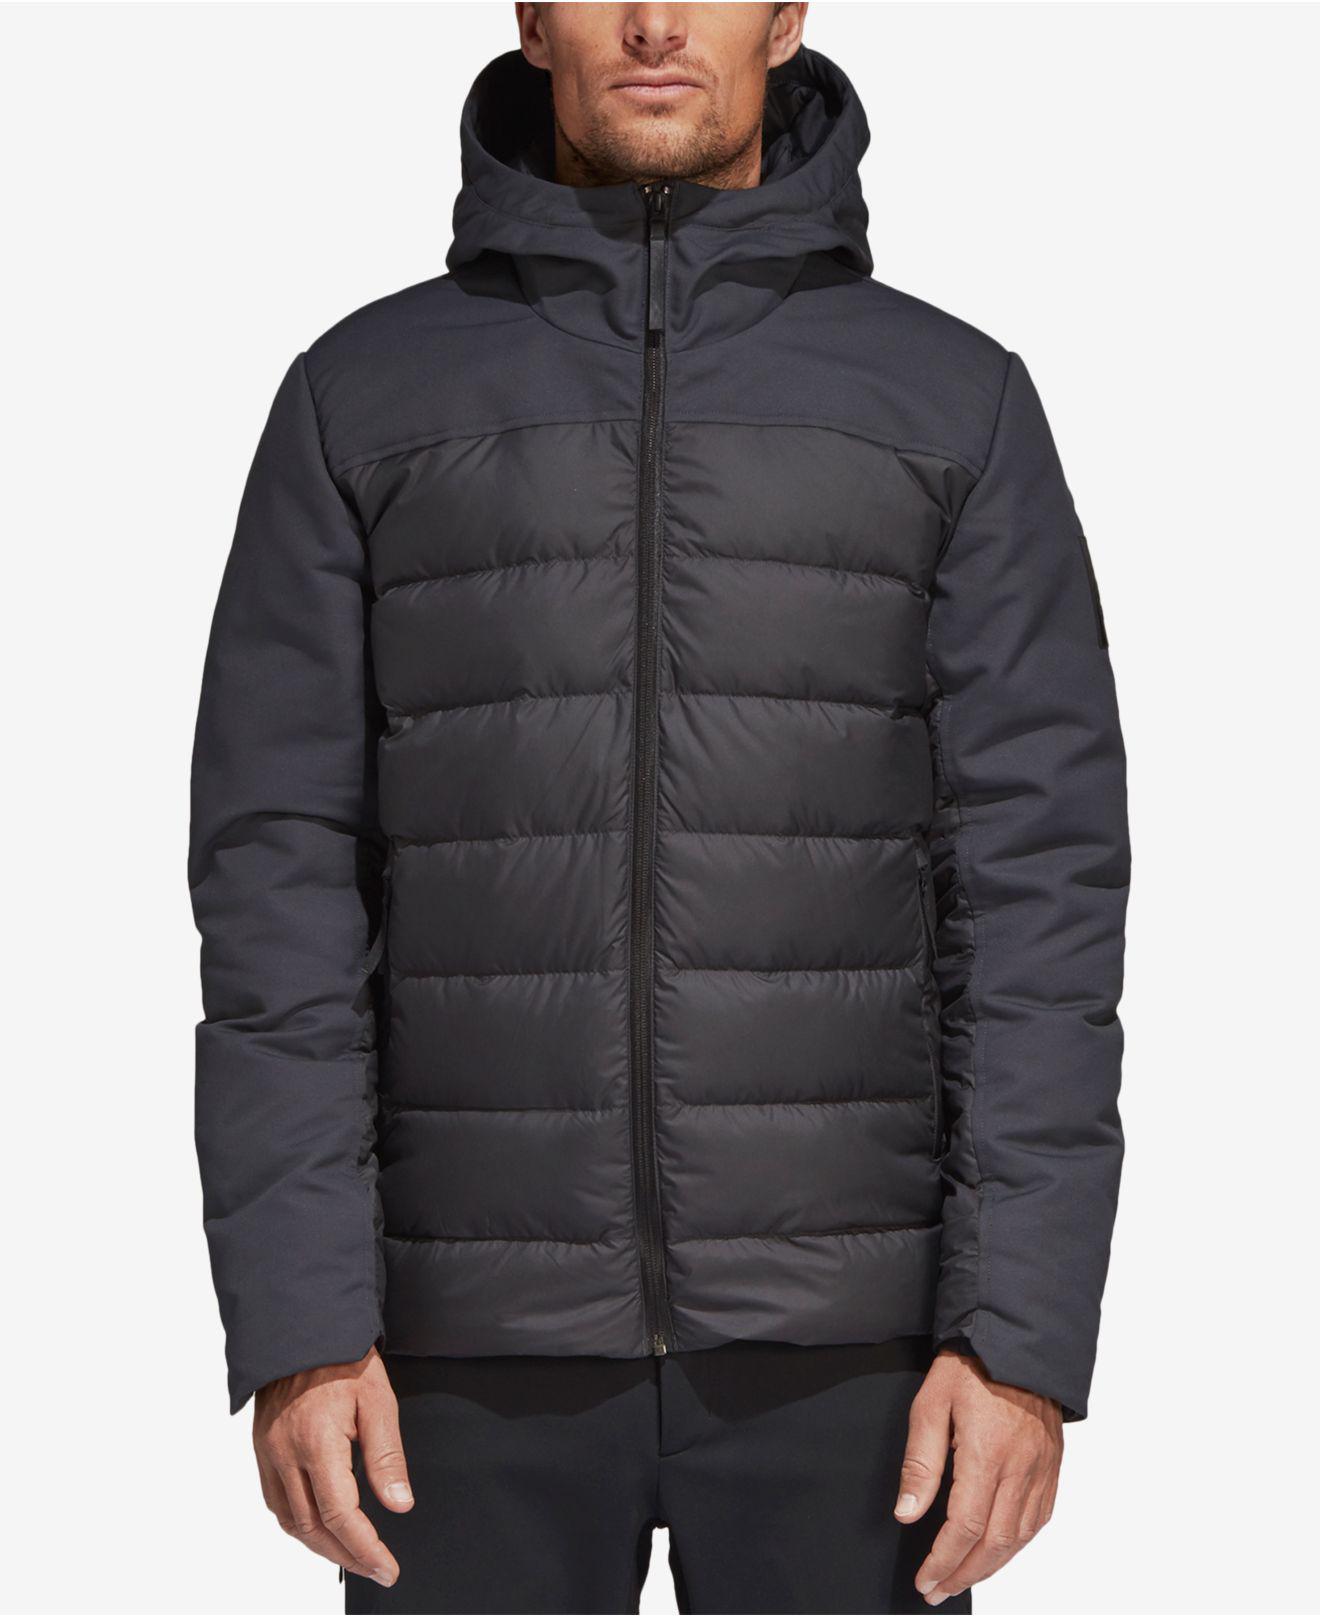 Lyst - adidas Climawarm® Down Jacket in Black for Men